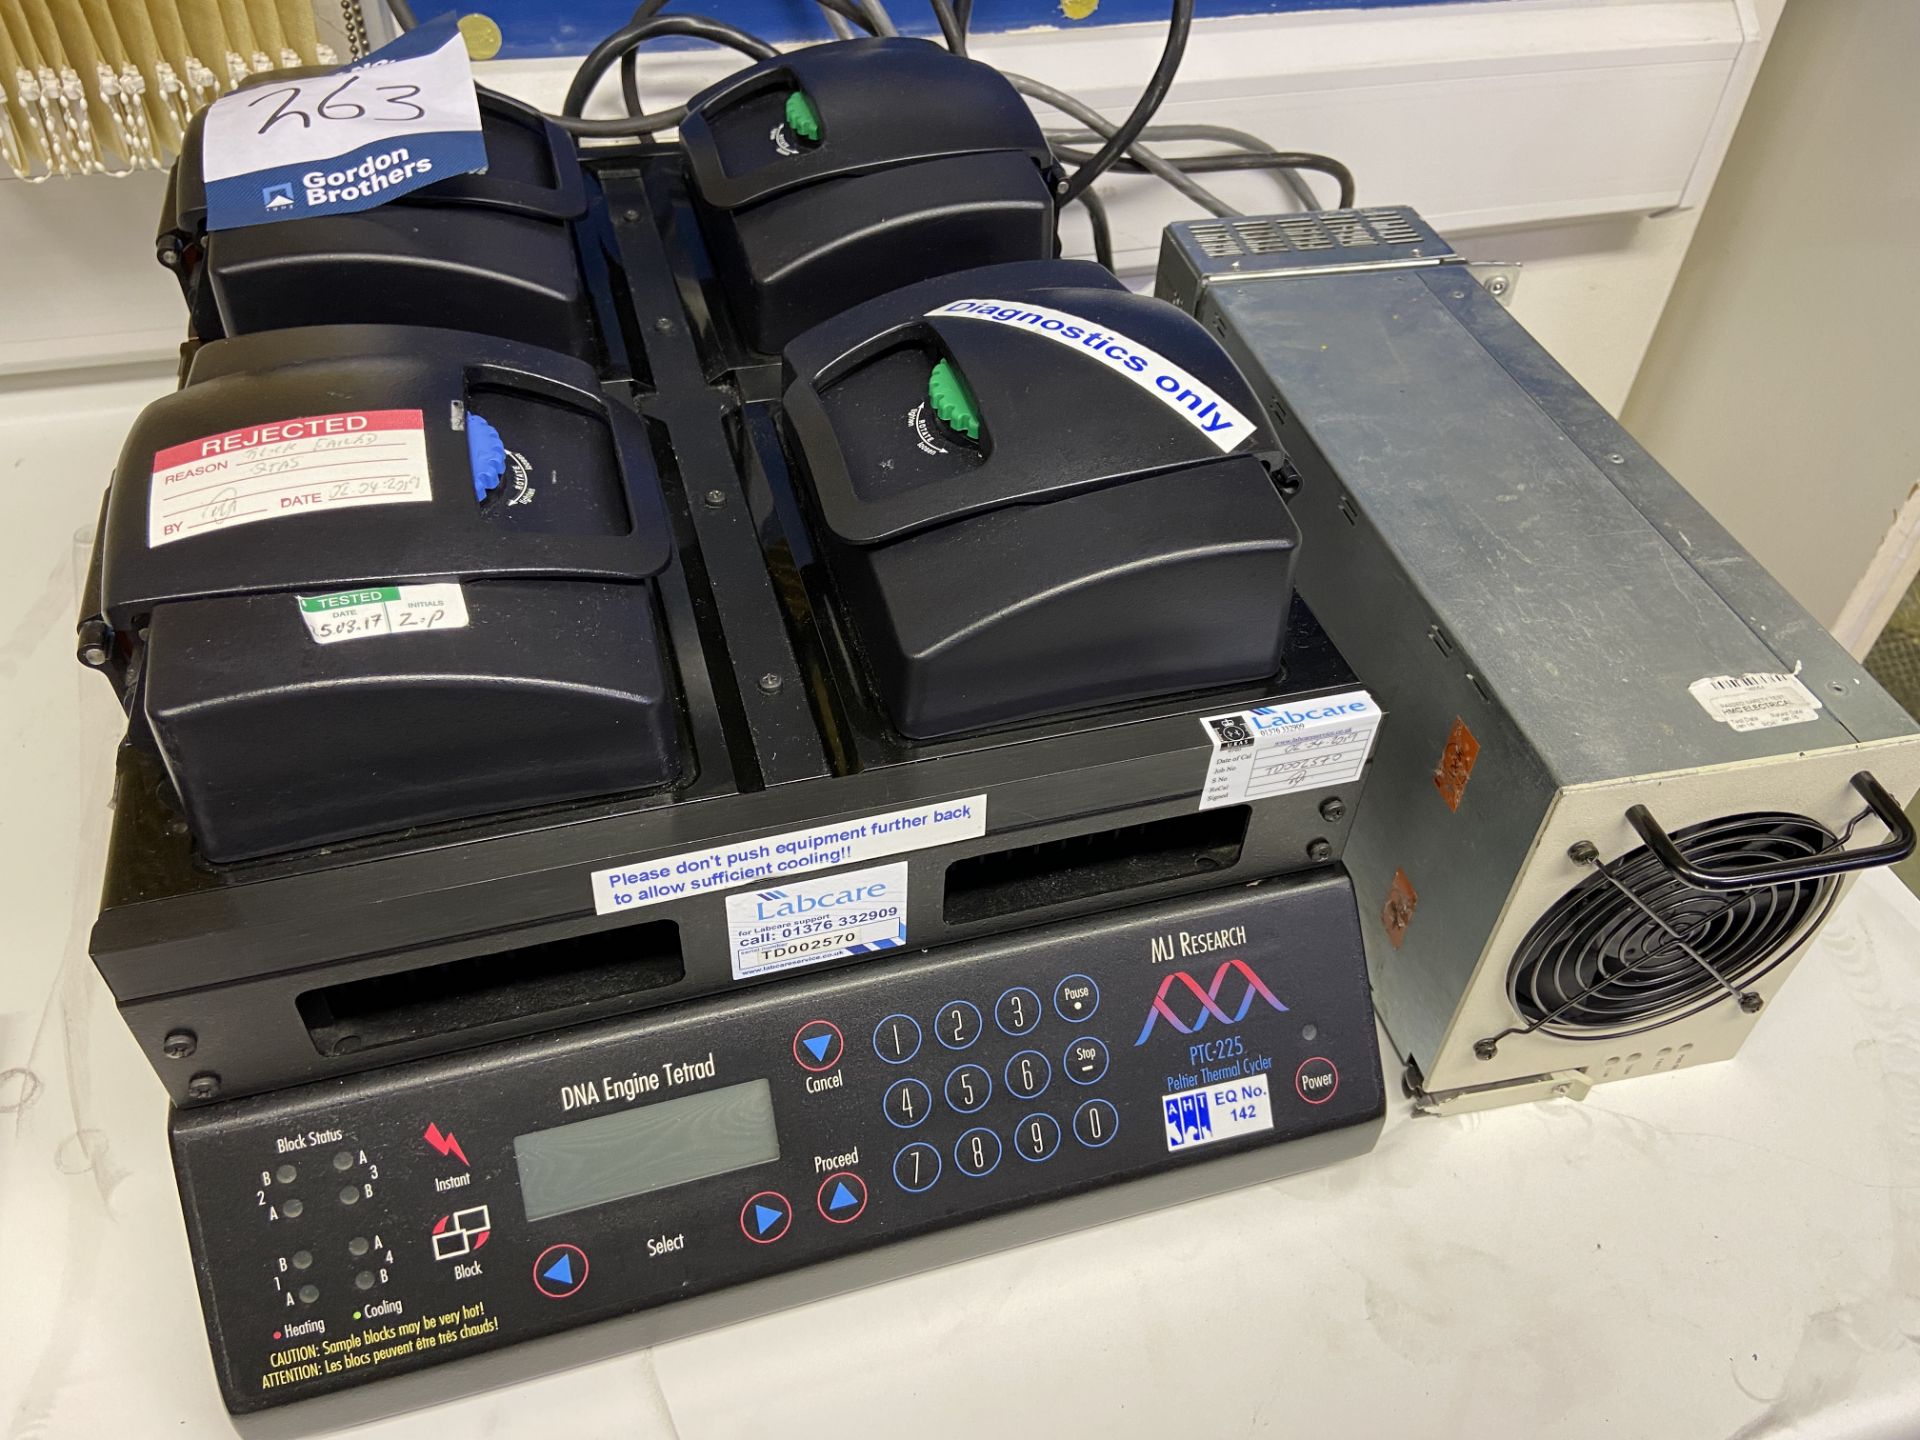 MJ Research Inc. PTC 225 Peltier thermal cycler, Serial No. TD002570, with RM2000HA power pack